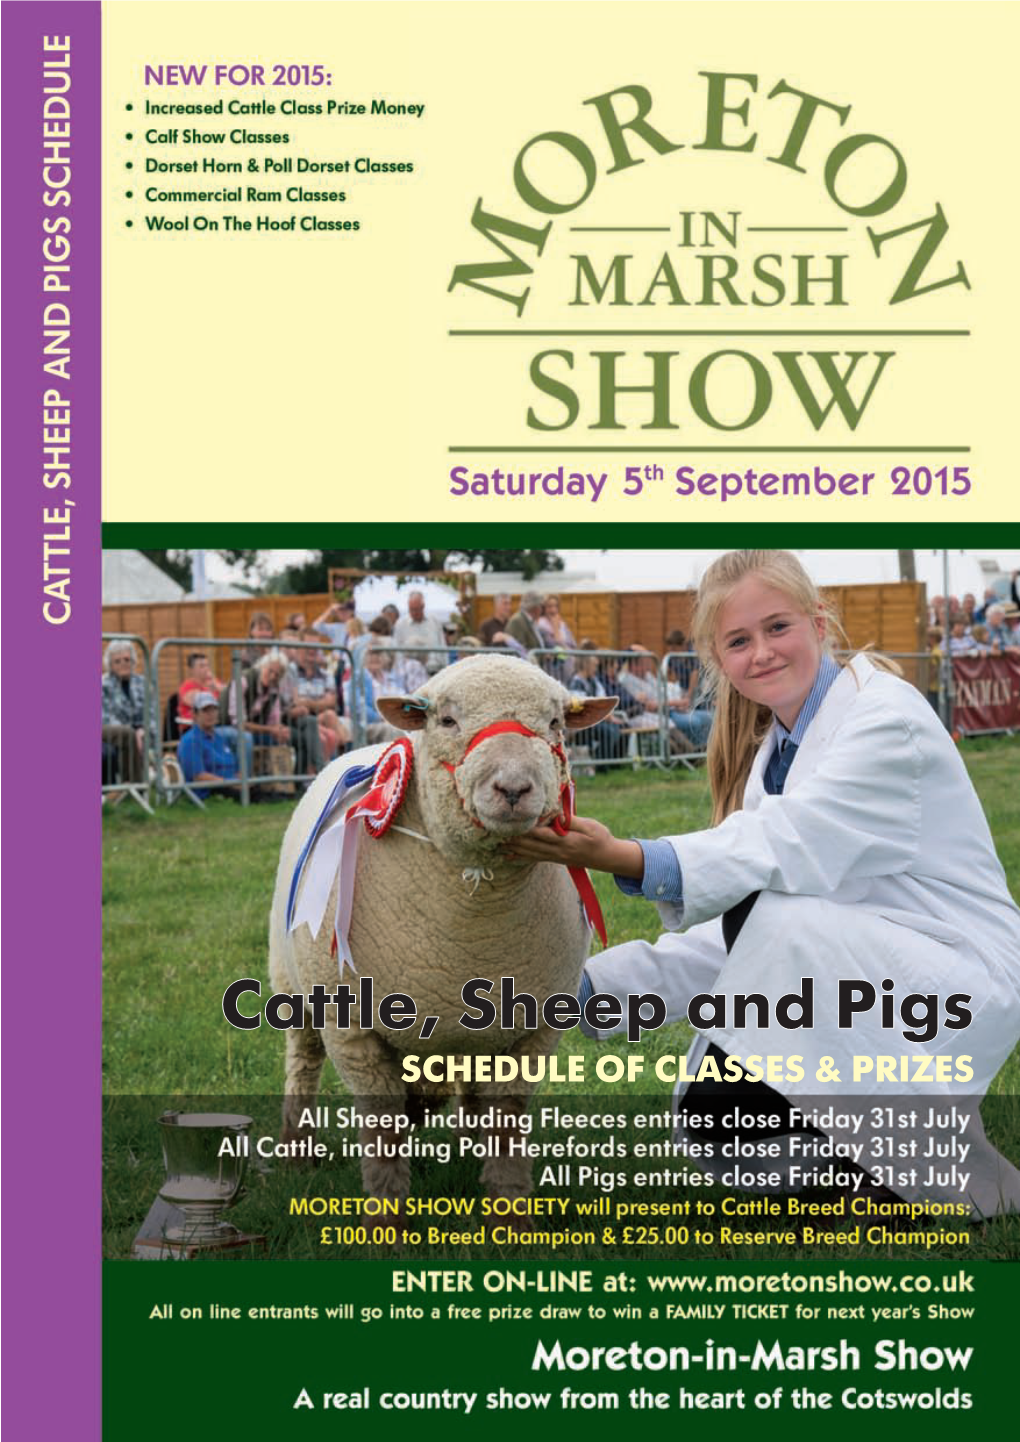 Sheep and Pigs SCHEDULE of CLASSES & PRIZES MORETON-IN-MARSH and DISTRICT AGRICULTURAL and HORSE SHOW SOCIETY Company Limited by Guarantee, Registered in England No